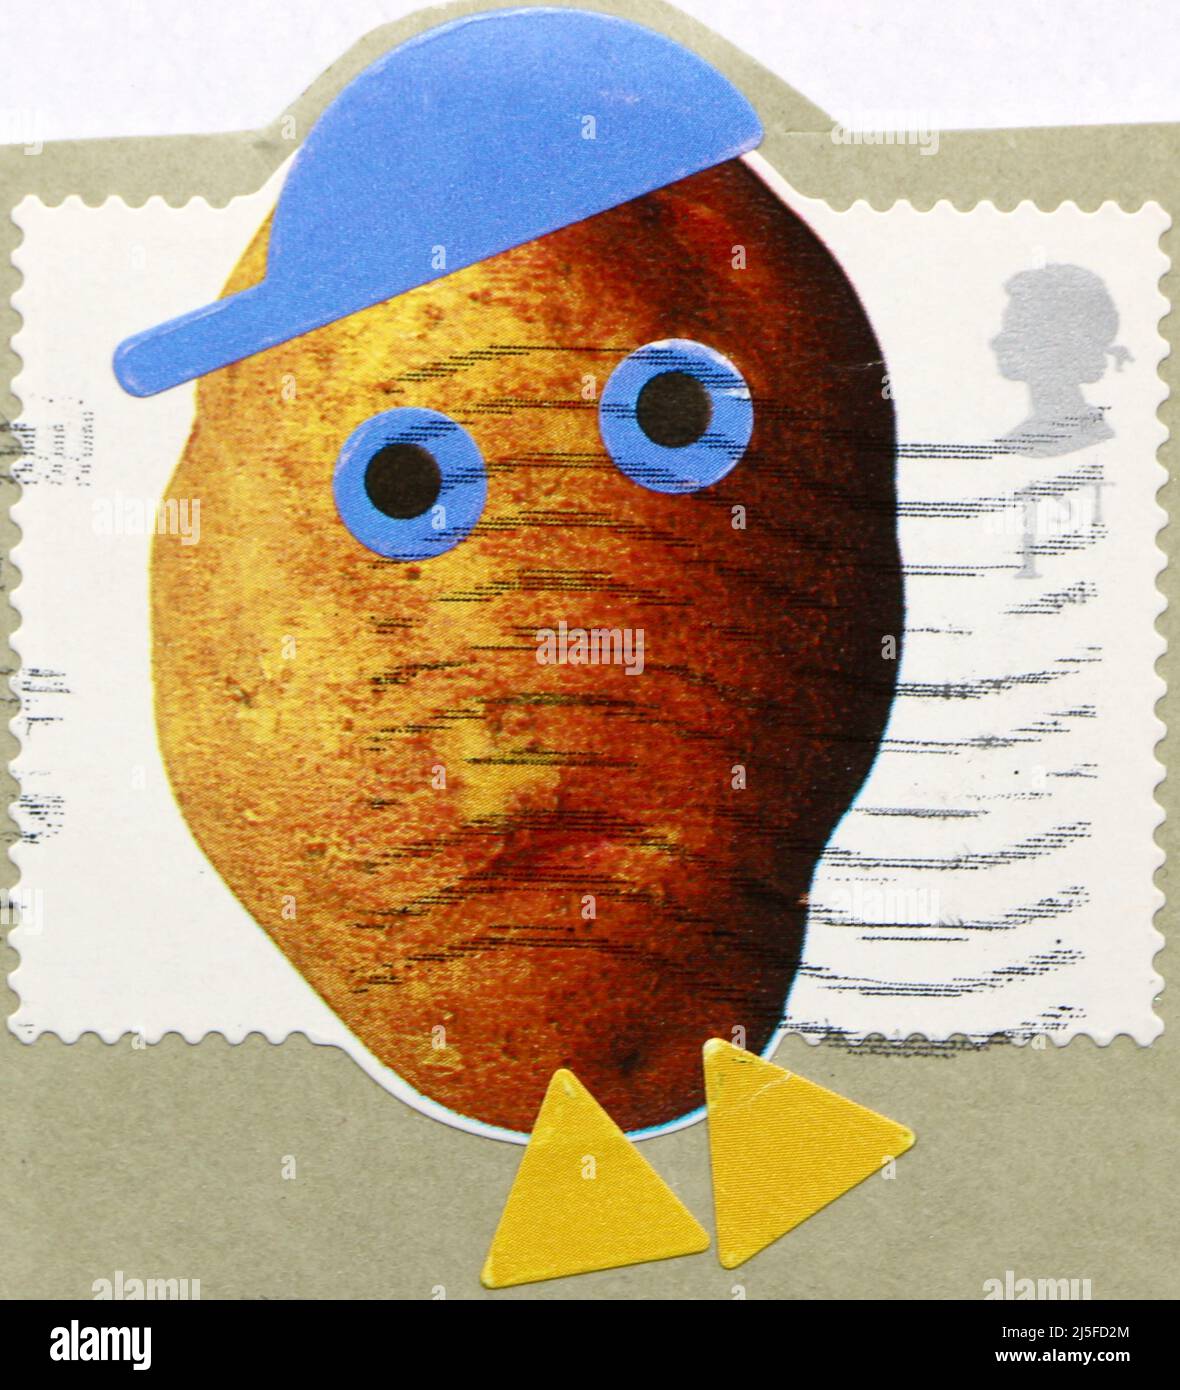 Photo of a British postage stamp with an unusual shape to accommodate Mr Potato head sold with stickers Stock Photo